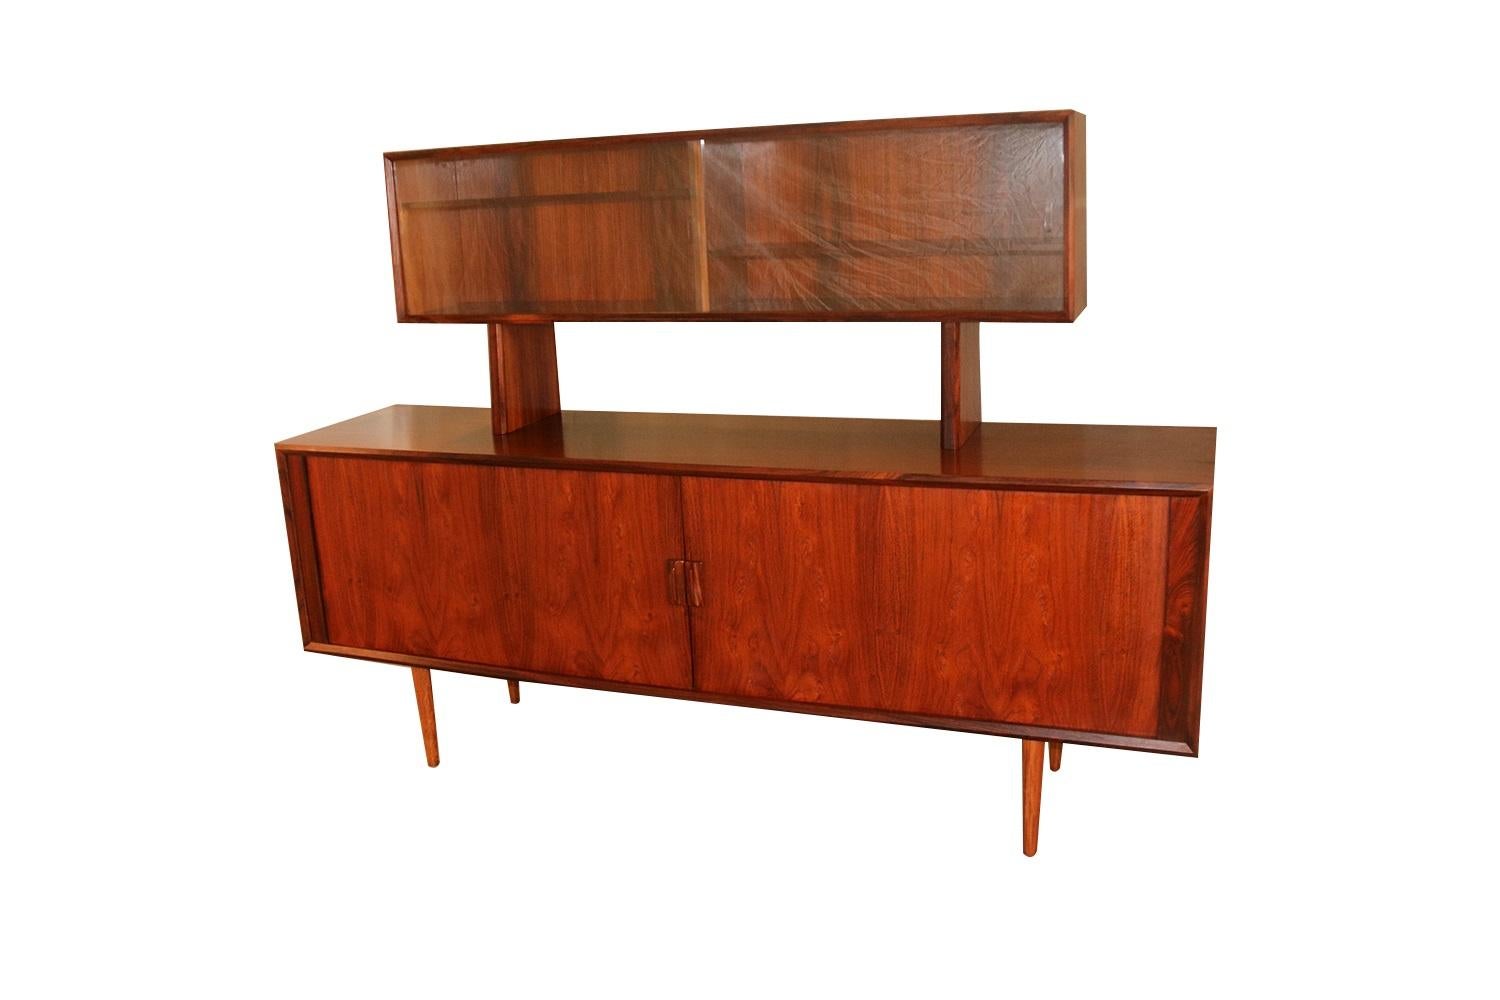 Remarkable rosewood, stunning two-piece hutch credenza by Famous designer Svend Larsen for Faarup Mobelfabrik made in Denmark. This Danish modern rosewood credenza, media China cabinet is beautifully embellished with bands of rosewood running